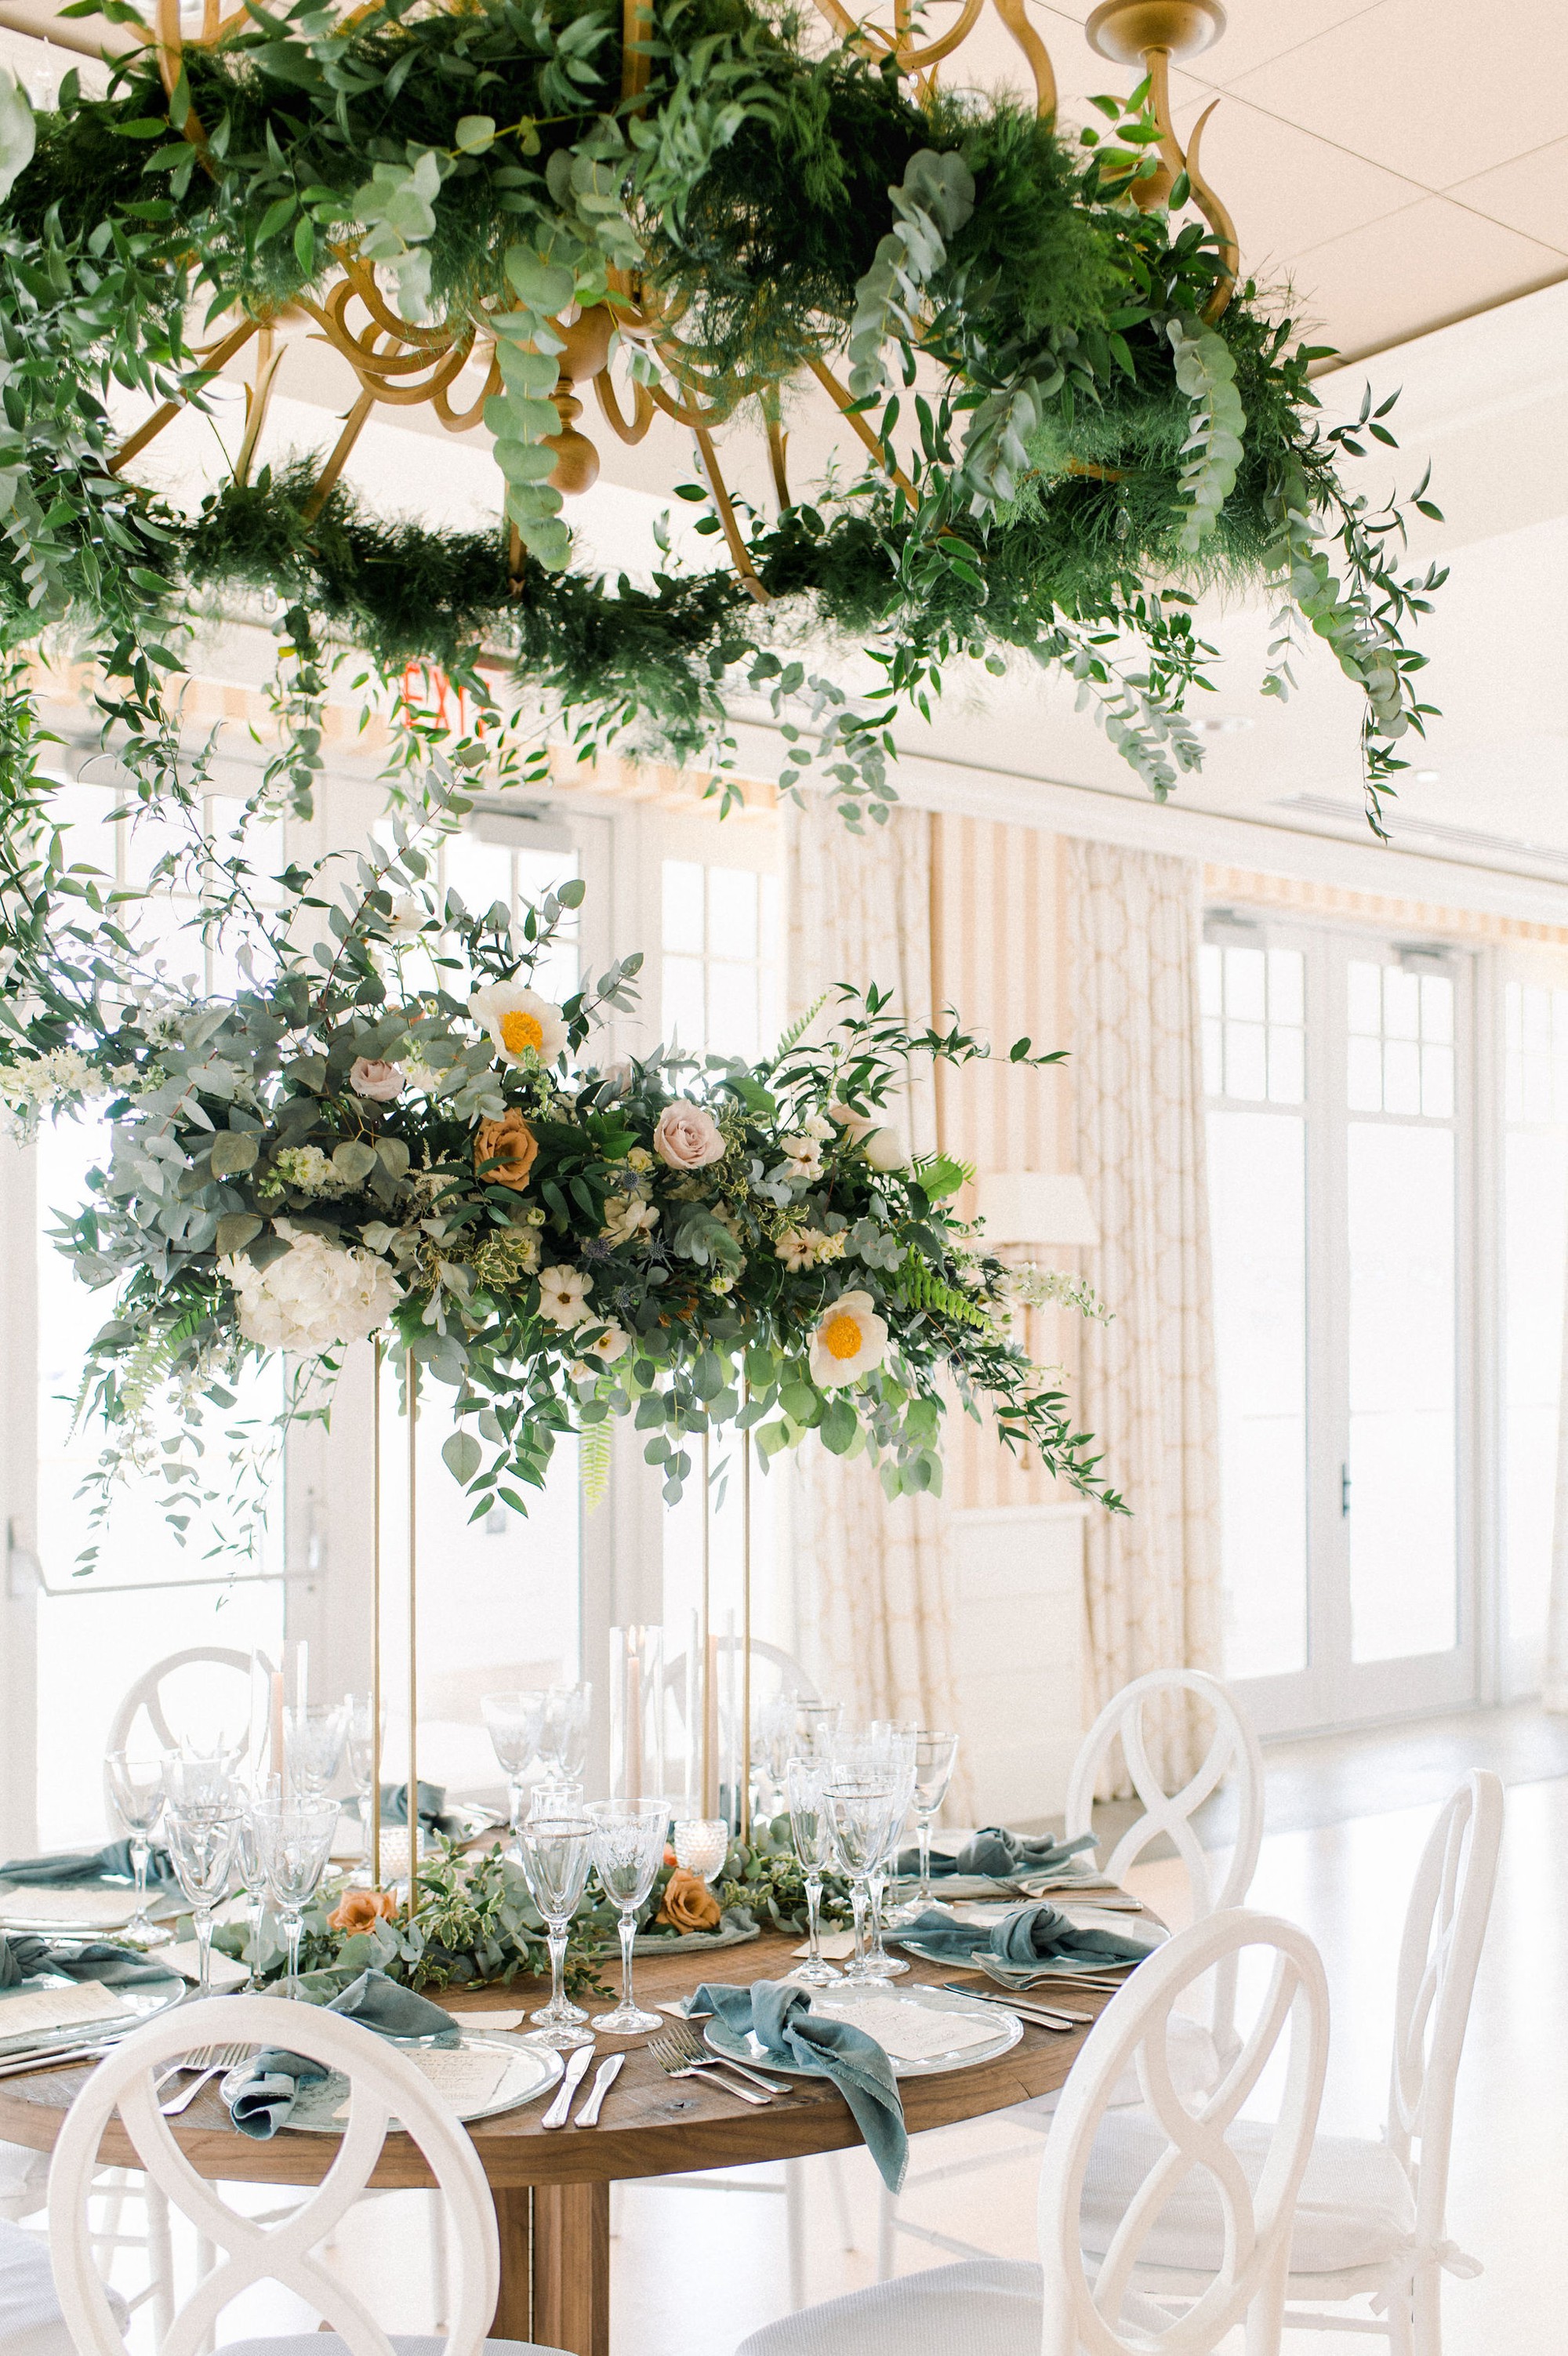 Gloucester MA Beauport Hotel Wedding | Tuscan meets modern | Party Rental LTD white chairs, round farm table, glass marble charger, glassware, and cloth napkins | hand lettered calligraphy wedding menus | modern hanging reception flowers by Lilac & Lily